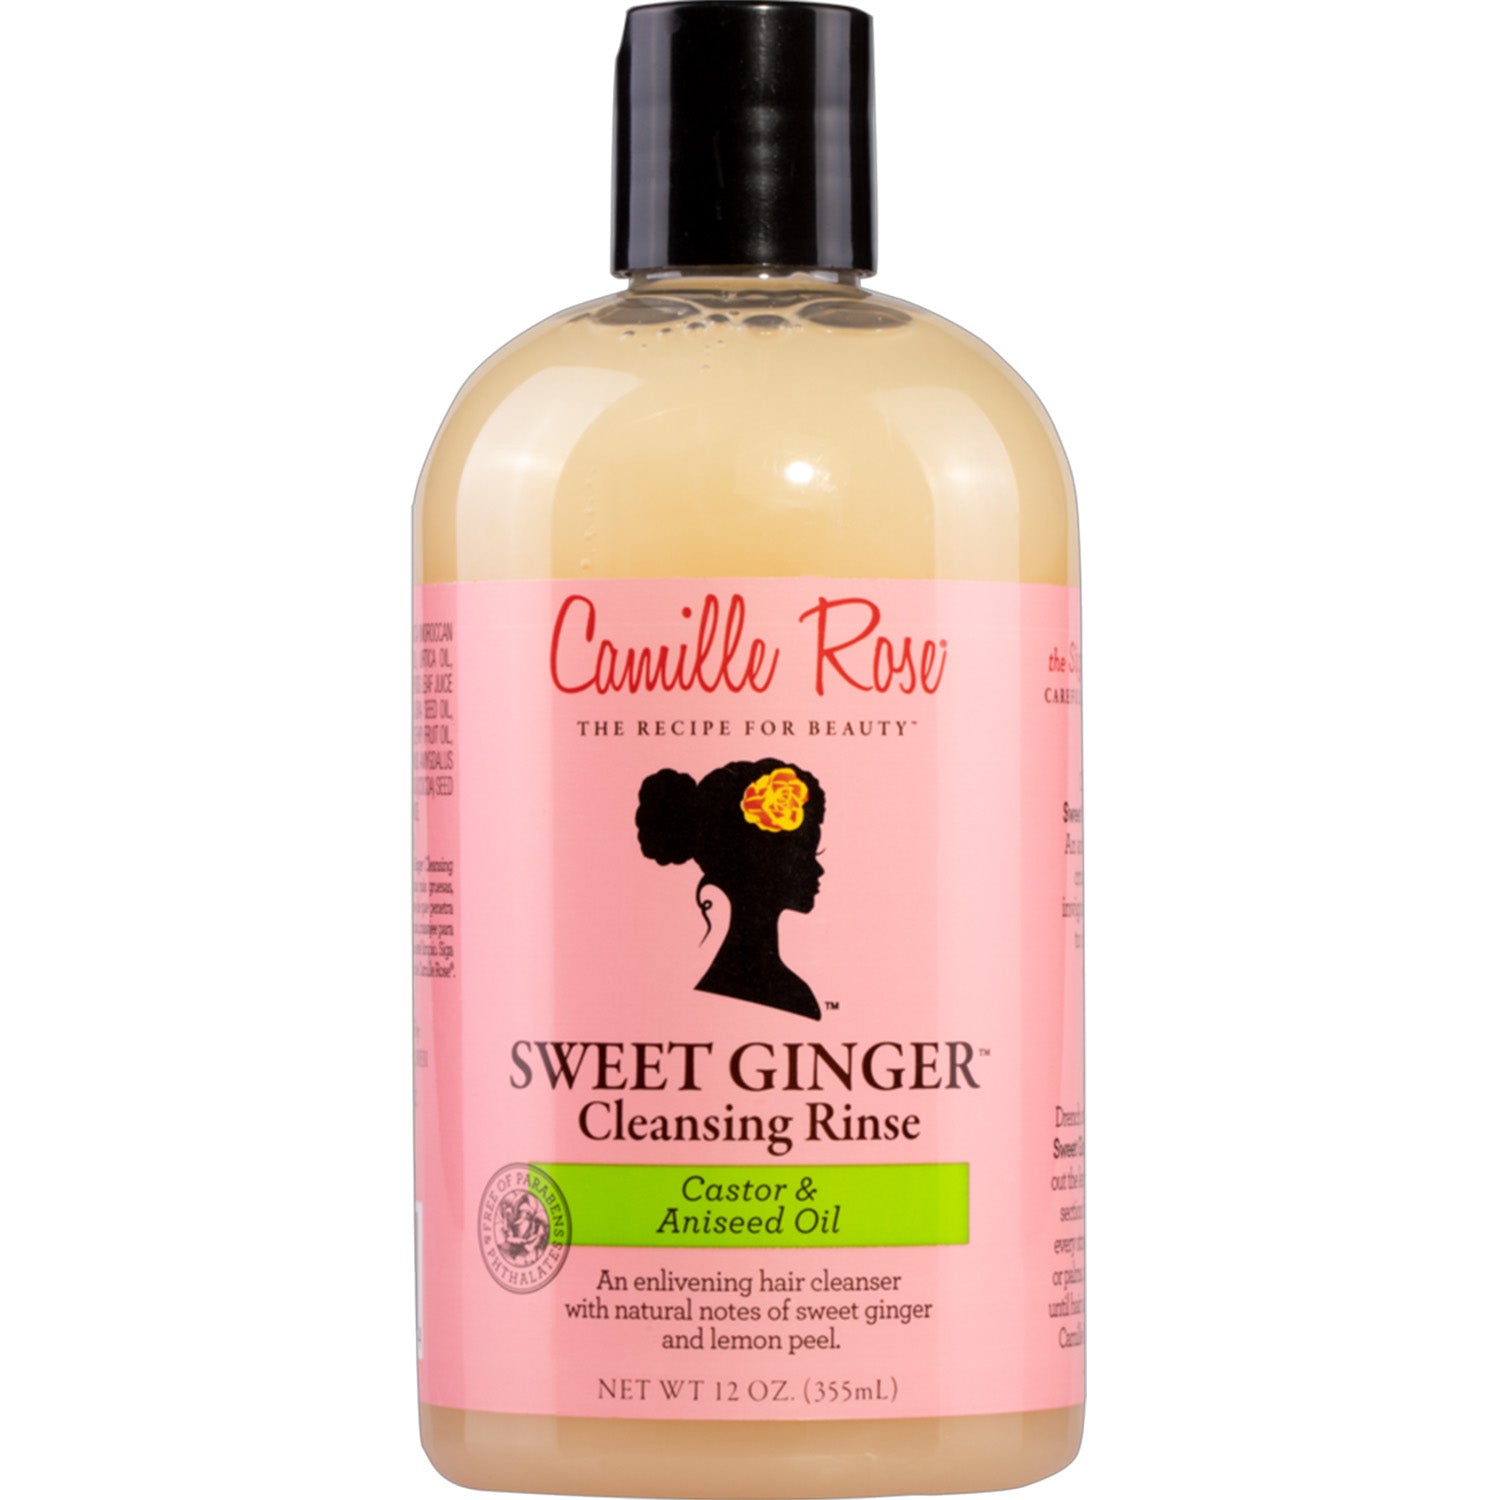 CAMILLE ROSE SWEET GINGER CLEANSING RINSE 12oz.